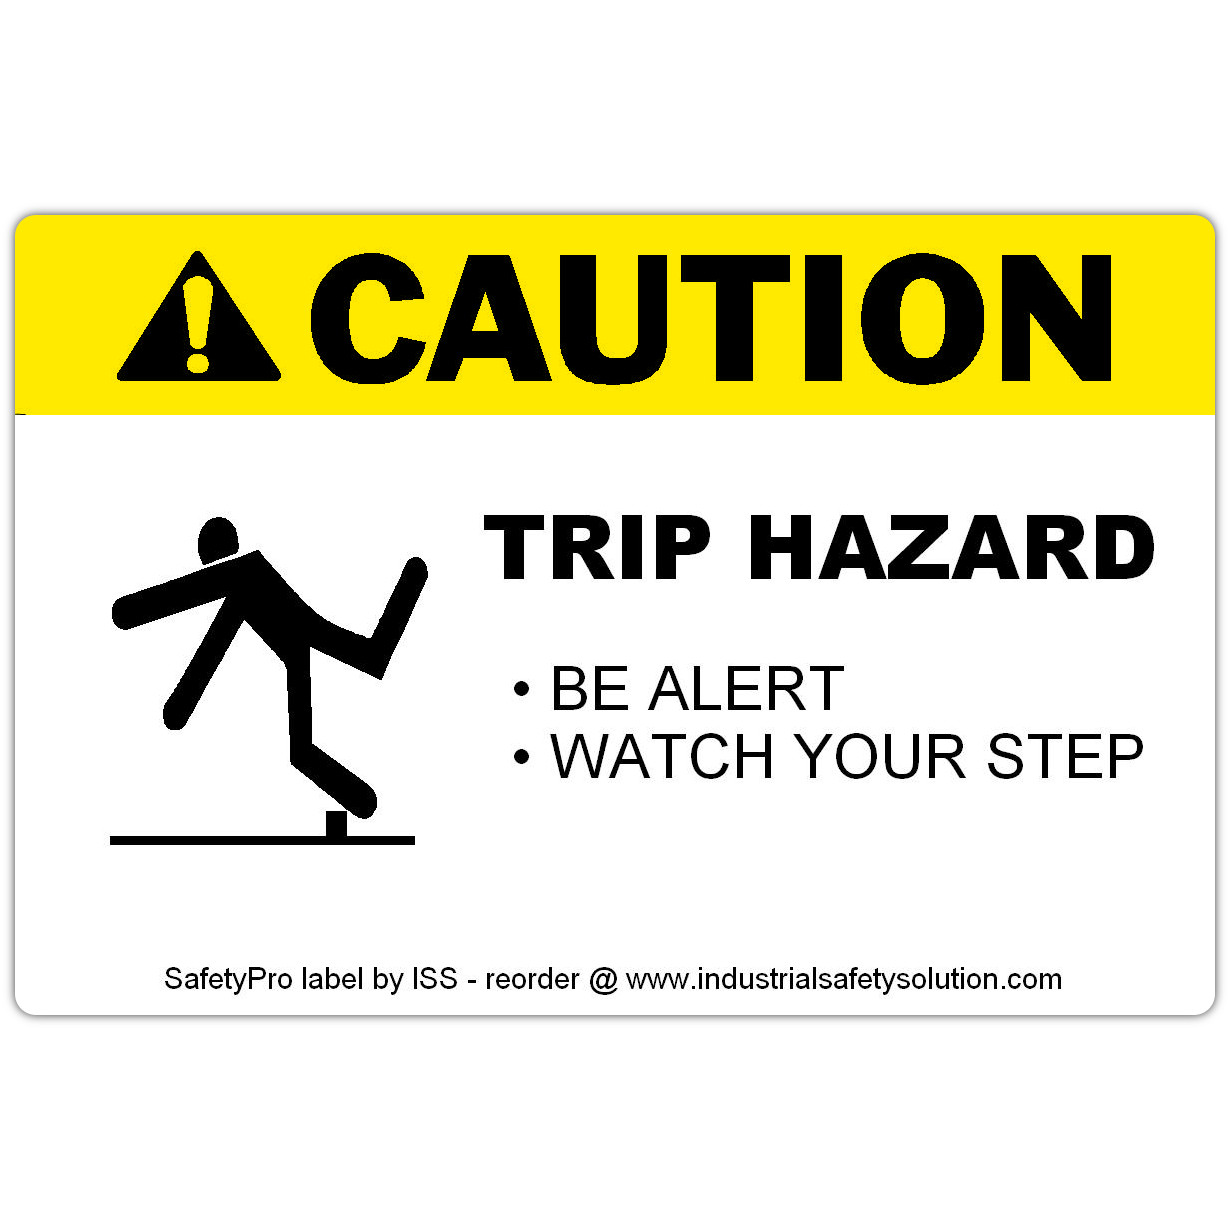 Ask a question about 4" x 6" CAUTION Trip Hazard Safety Label